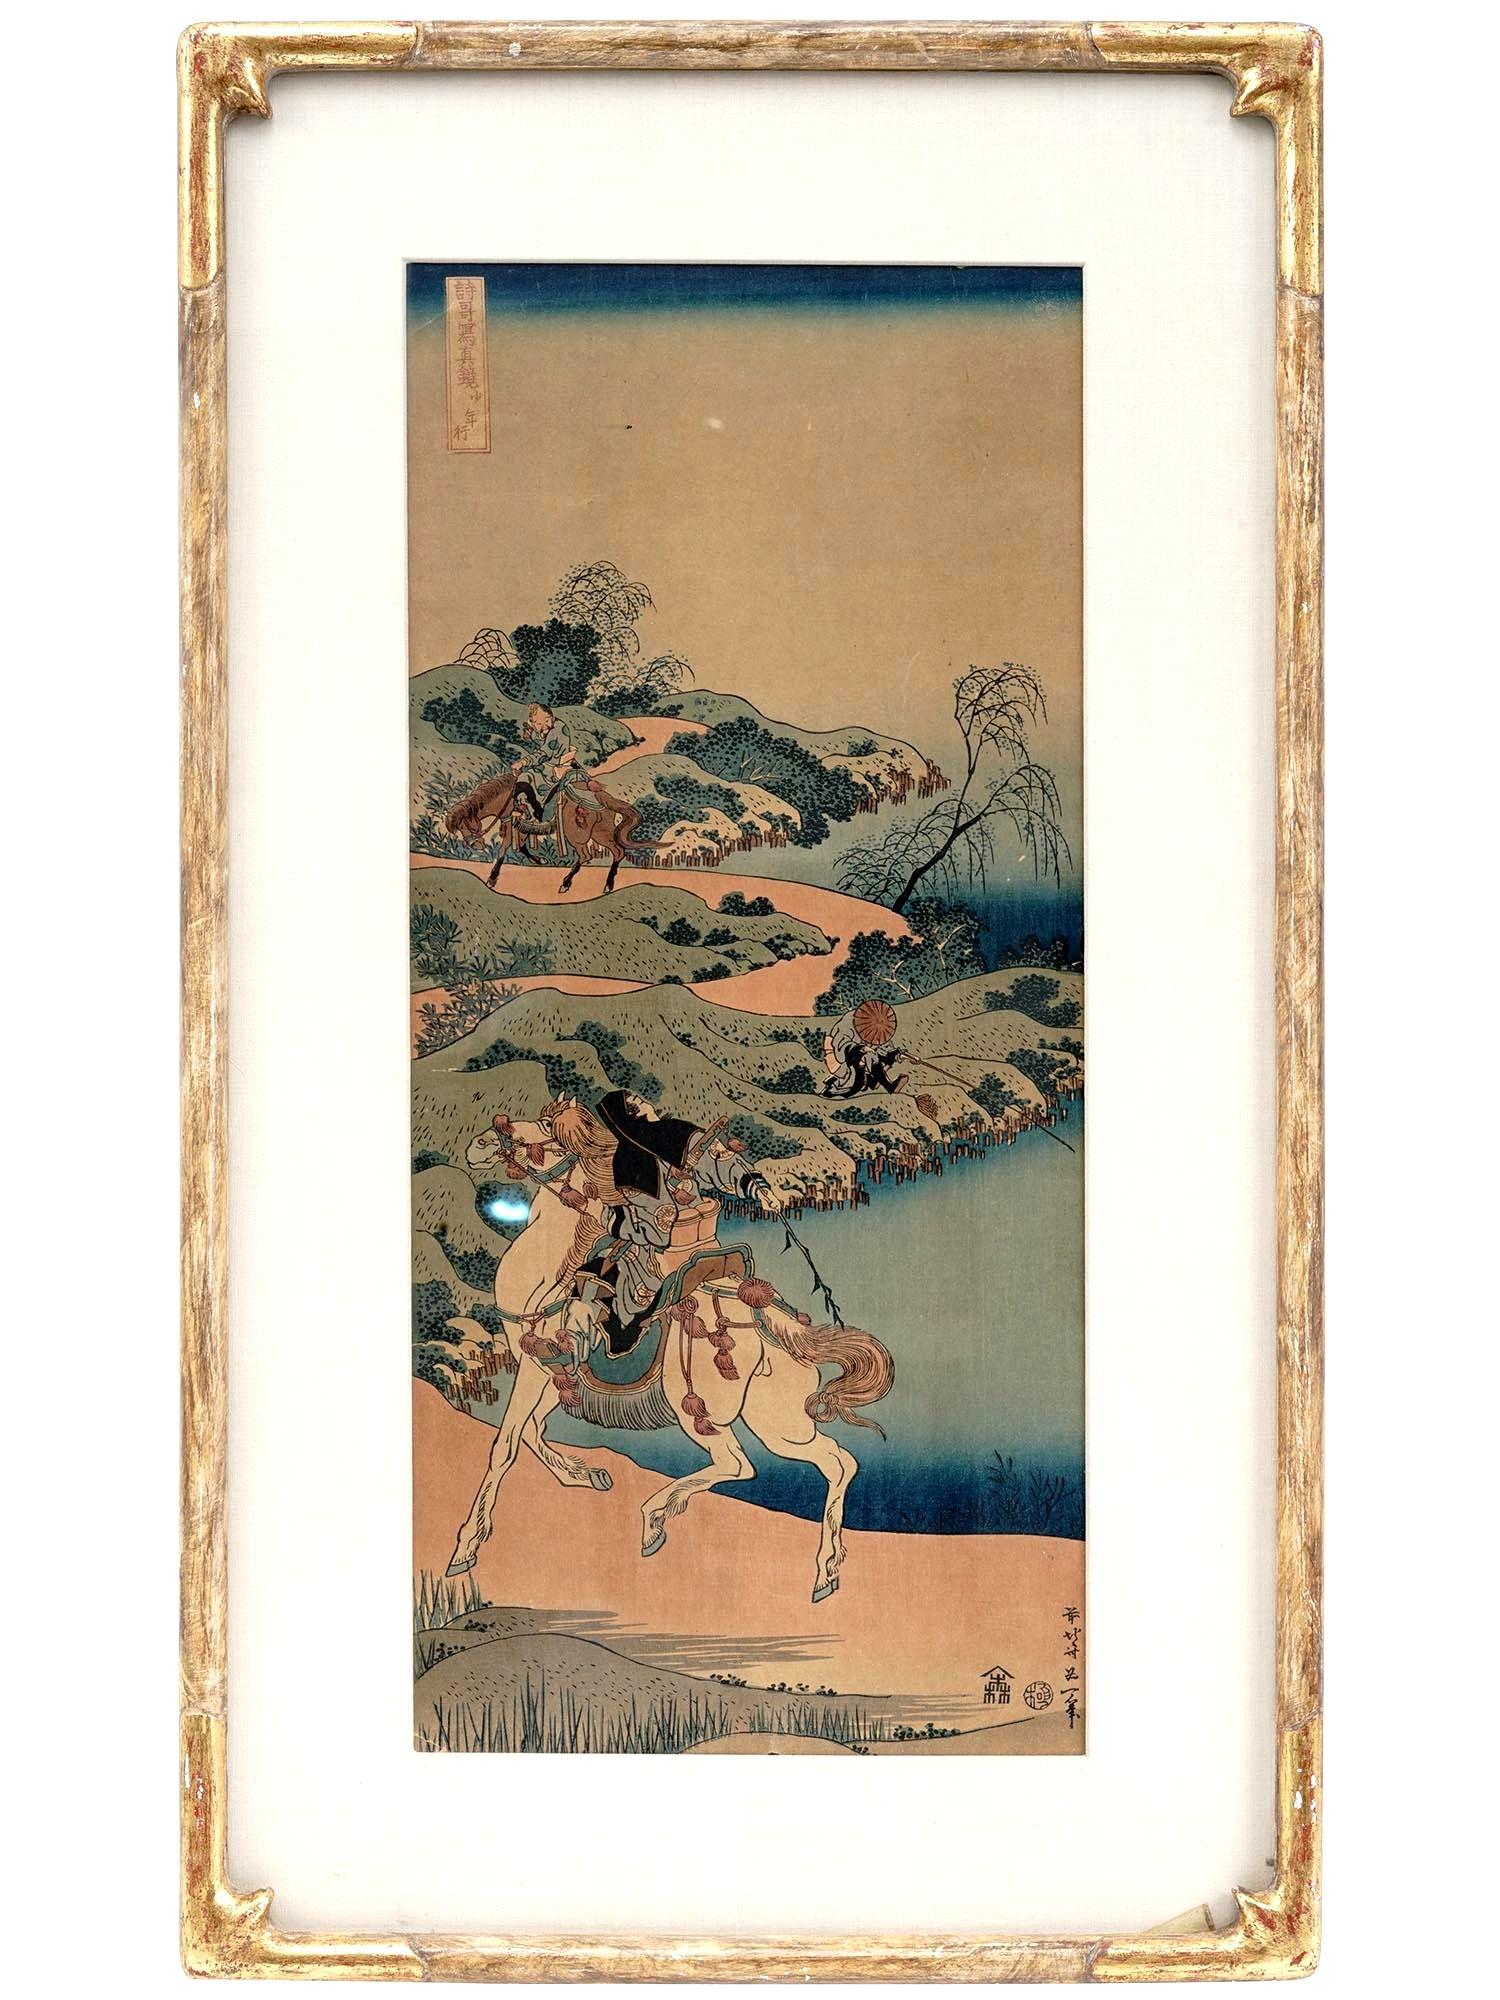 Original Japanese Woodblock print by Hokusai Katsushika, ???? '1760-1849'
Color woodblock print on paper by Katsushika Hokusai, 1760 to 1849, a Japanese ukiyo-e printmaker of the late Edo period. From the Realistic Mirror of Poets series based on